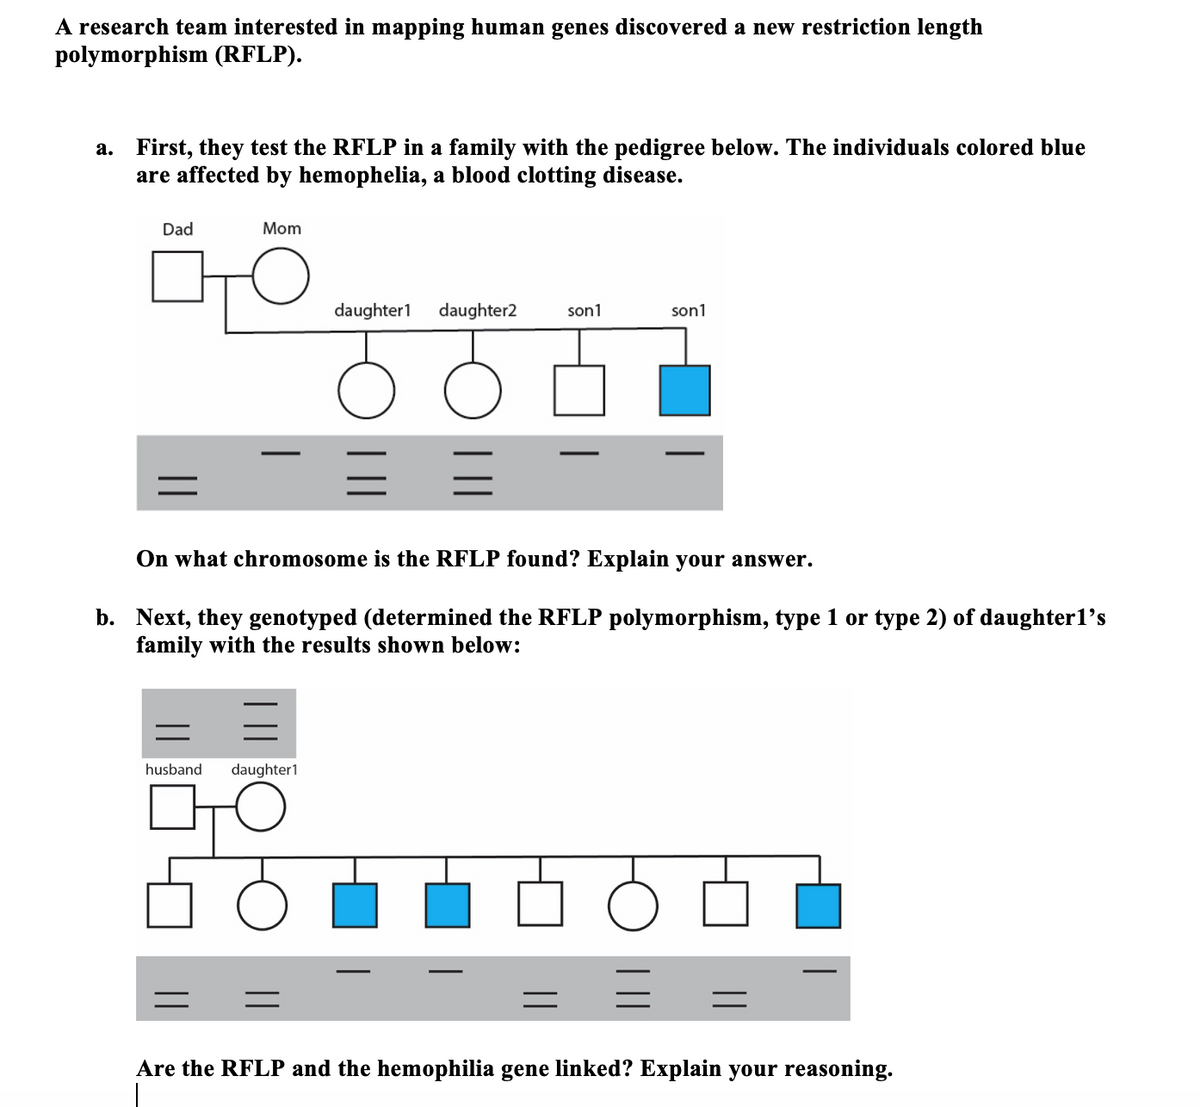 A research team interested in mapping human genes discovered a new restriction length
polymorphism (RFLP).
a. First, they test the RFLP in a family with the pedigree below. The individuals colored blue
are affected by hemophelia, a blood clotting disease.
Dad
Mom
daughter1
daughter2
son1
son1
On what chromosome is the RFLP found? Explain your answer.
b. Next, they genotyped (determined the RFLP polymorphism, type 1 or type 2) of daughterl's
family with the results shown below:
husband
daughter1
%3D
Are the RFLP and the hemophilia gene linked? Explain your reasoning.
